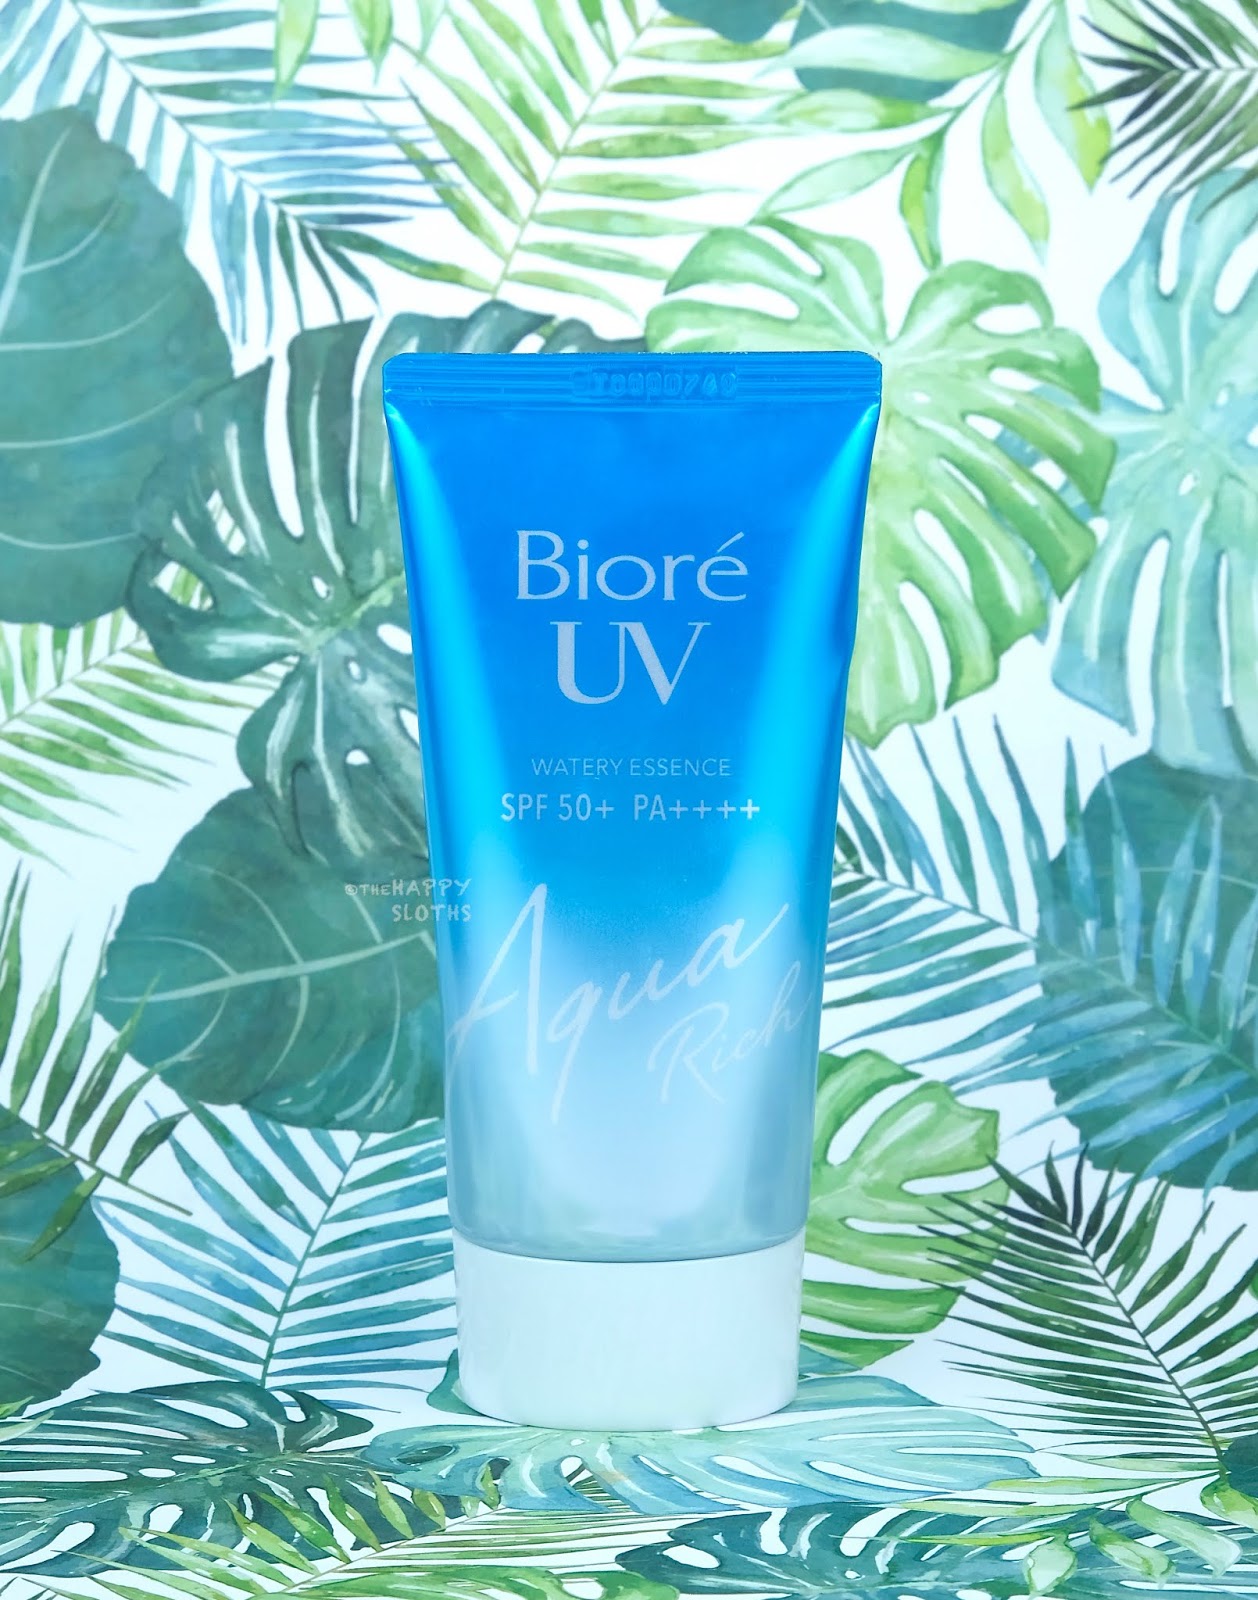 Biore Uv Aqua Rich Watery Essence Spf 50 Sunscreen Review The Happy Sloths Beauty Makeup And Skincare Blog With Reviews And Swatches